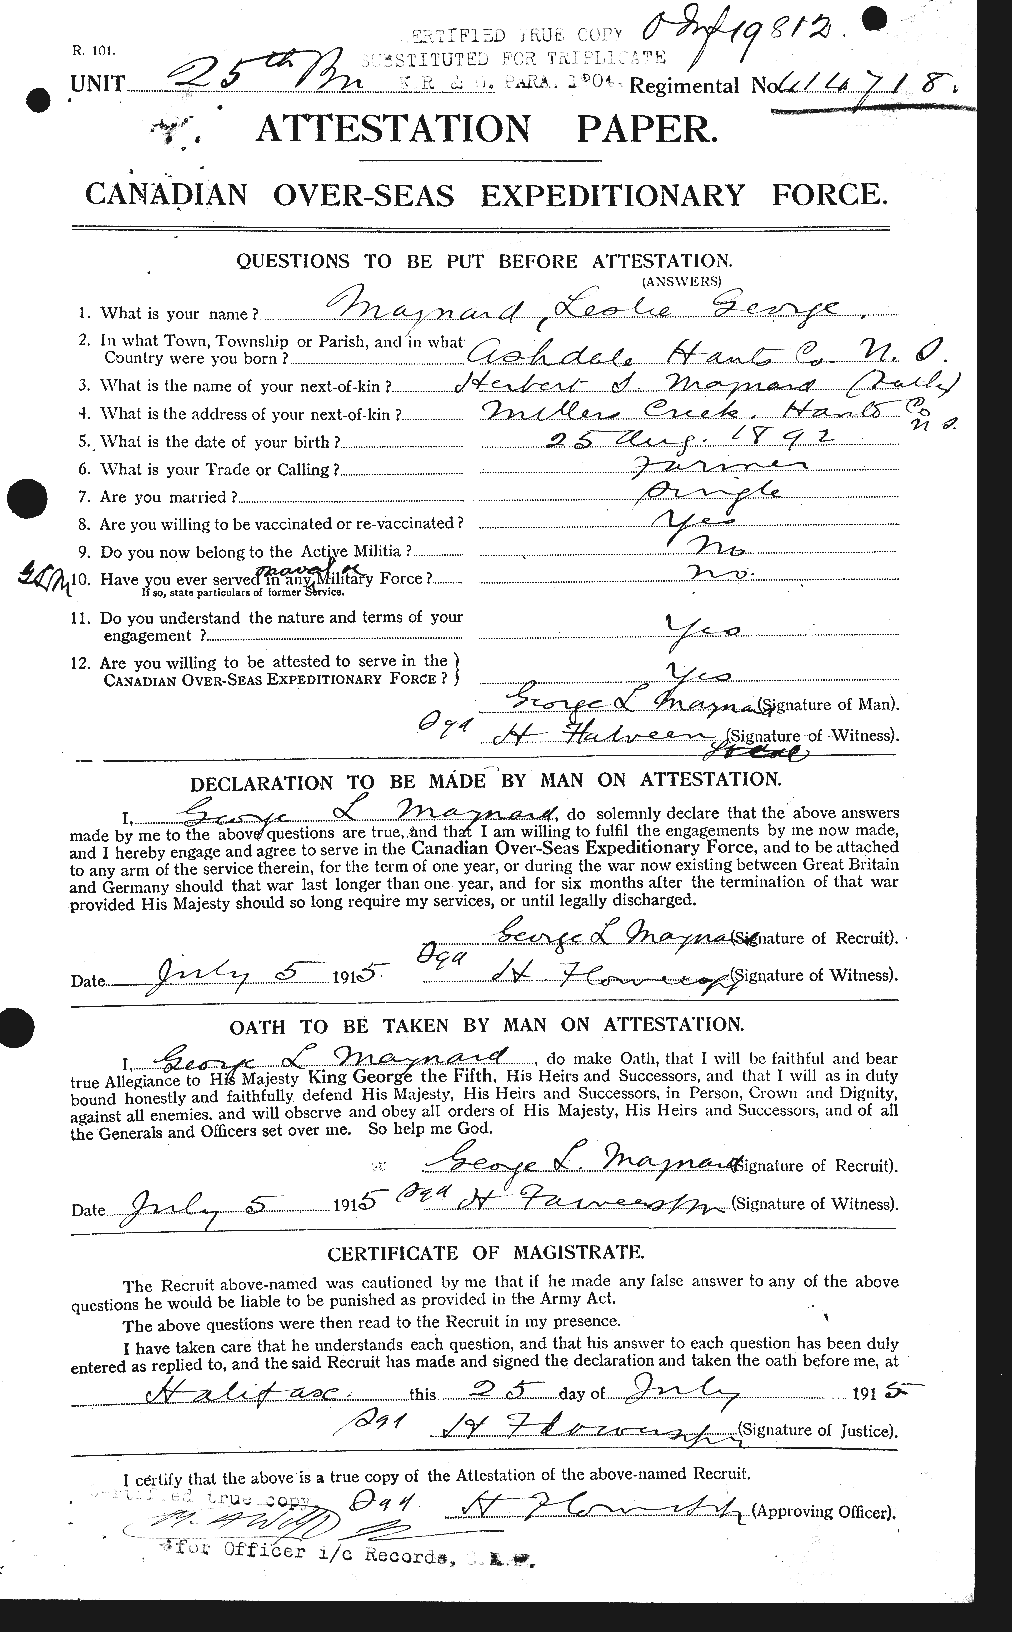 Personnel Records of the First World War - CEF 486685a